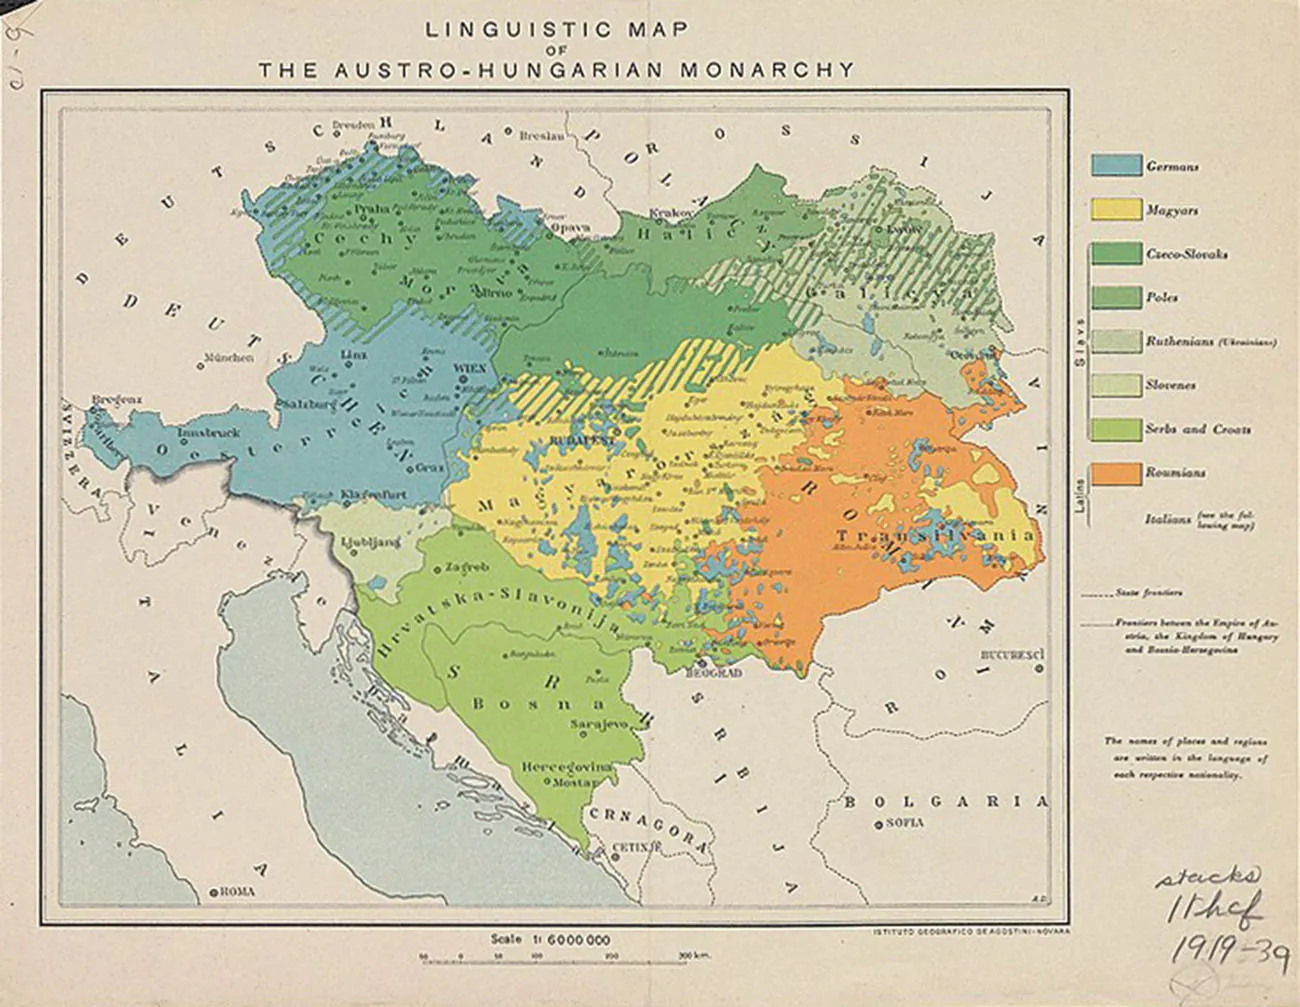 The map is titled “Linguistic Map of the Austro-Hungarian Monarchy.” The map is divided into eight regions that have some overlap: The western region is labeled Germans; the central region is labeled Magyars. The following regions are categorized as Slavs: the northern region is labeled Czeco-Slovaks; a smaller northern region is labeled Poles; the northeastern corner is labeled Ruthenians (Ukrainians); a small region in the west is labeled Slovenes; the southern region is labeled Serbs and Croats; the southeastern region is labeled Roumians.